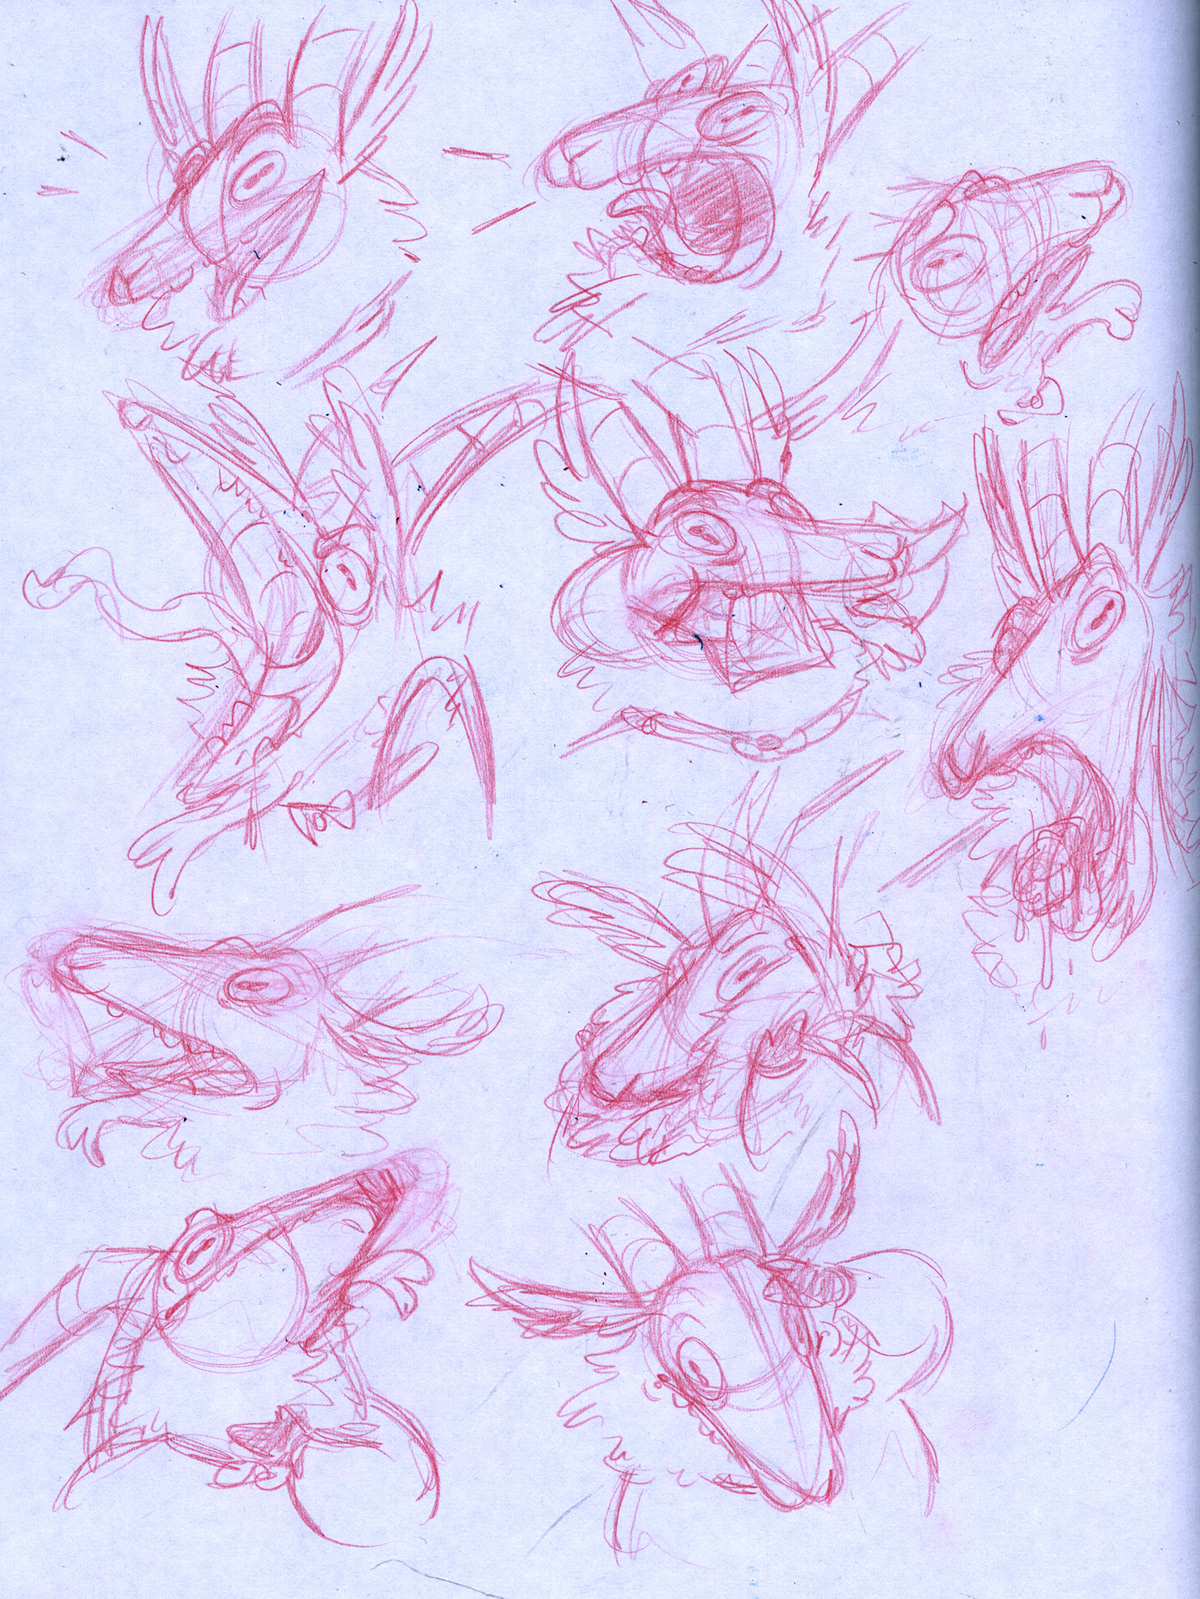 madethis sketches characters expressions